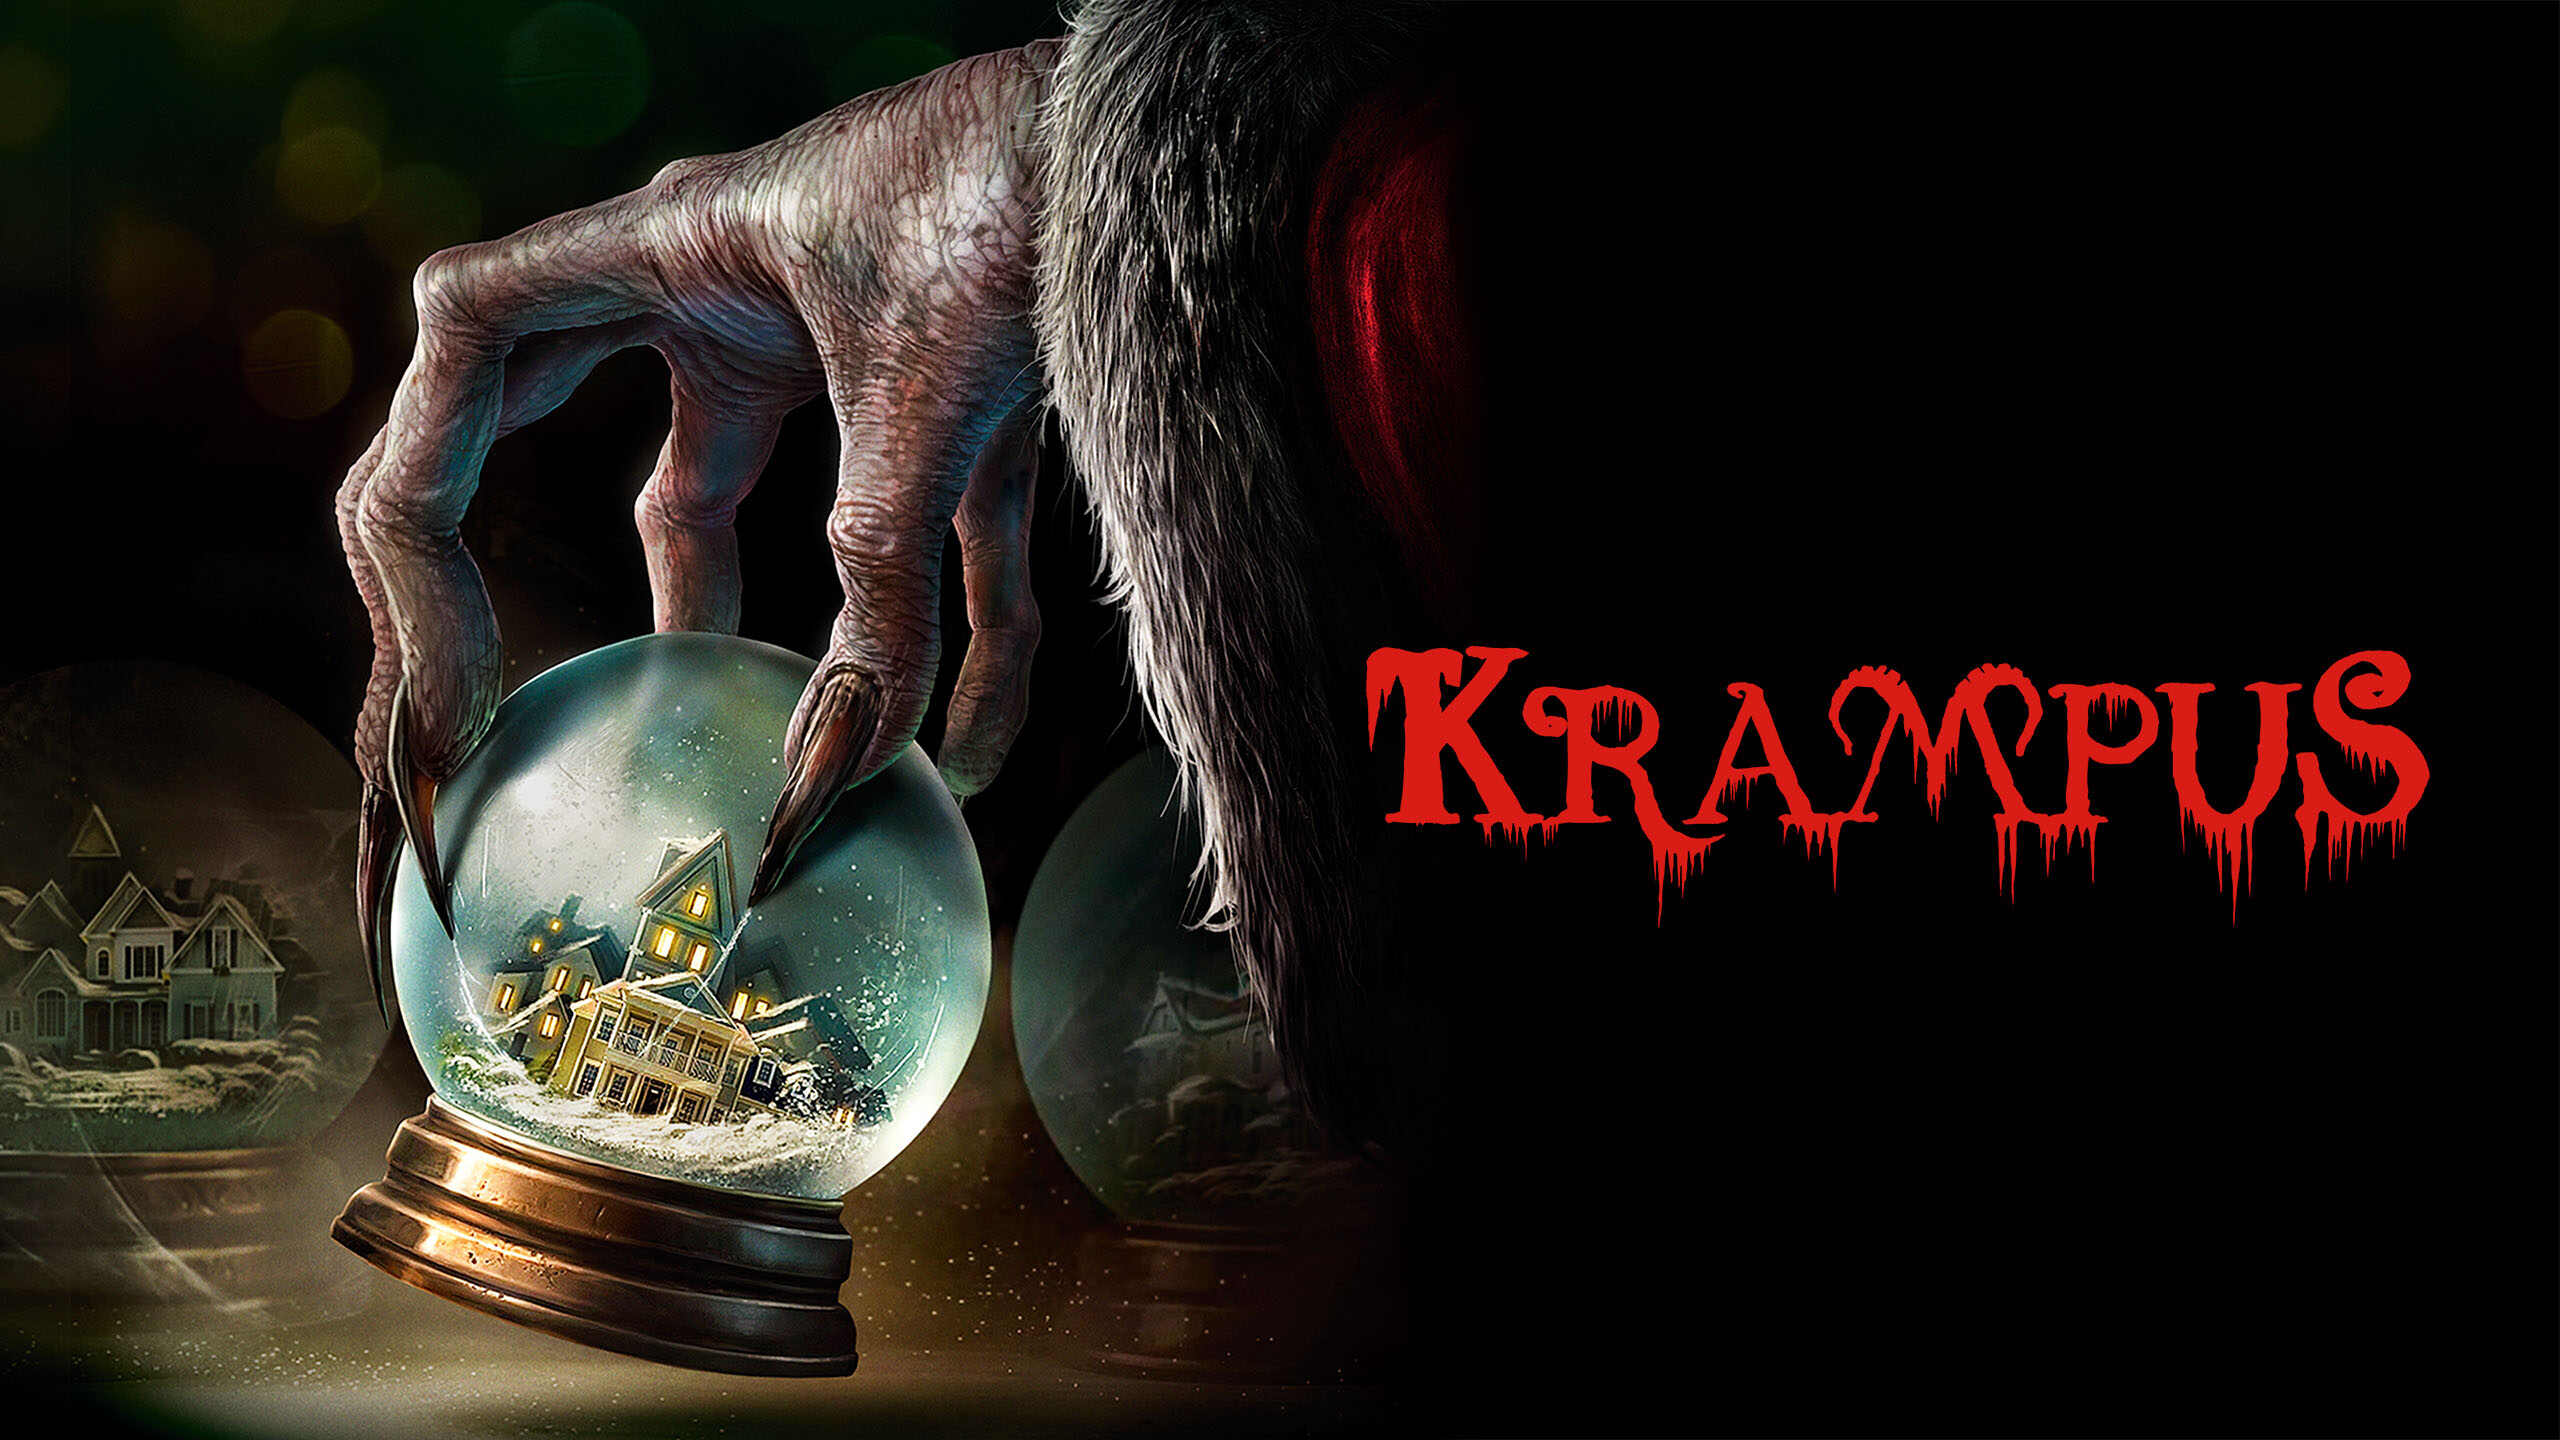 41-facts-about-the-movie-krampus